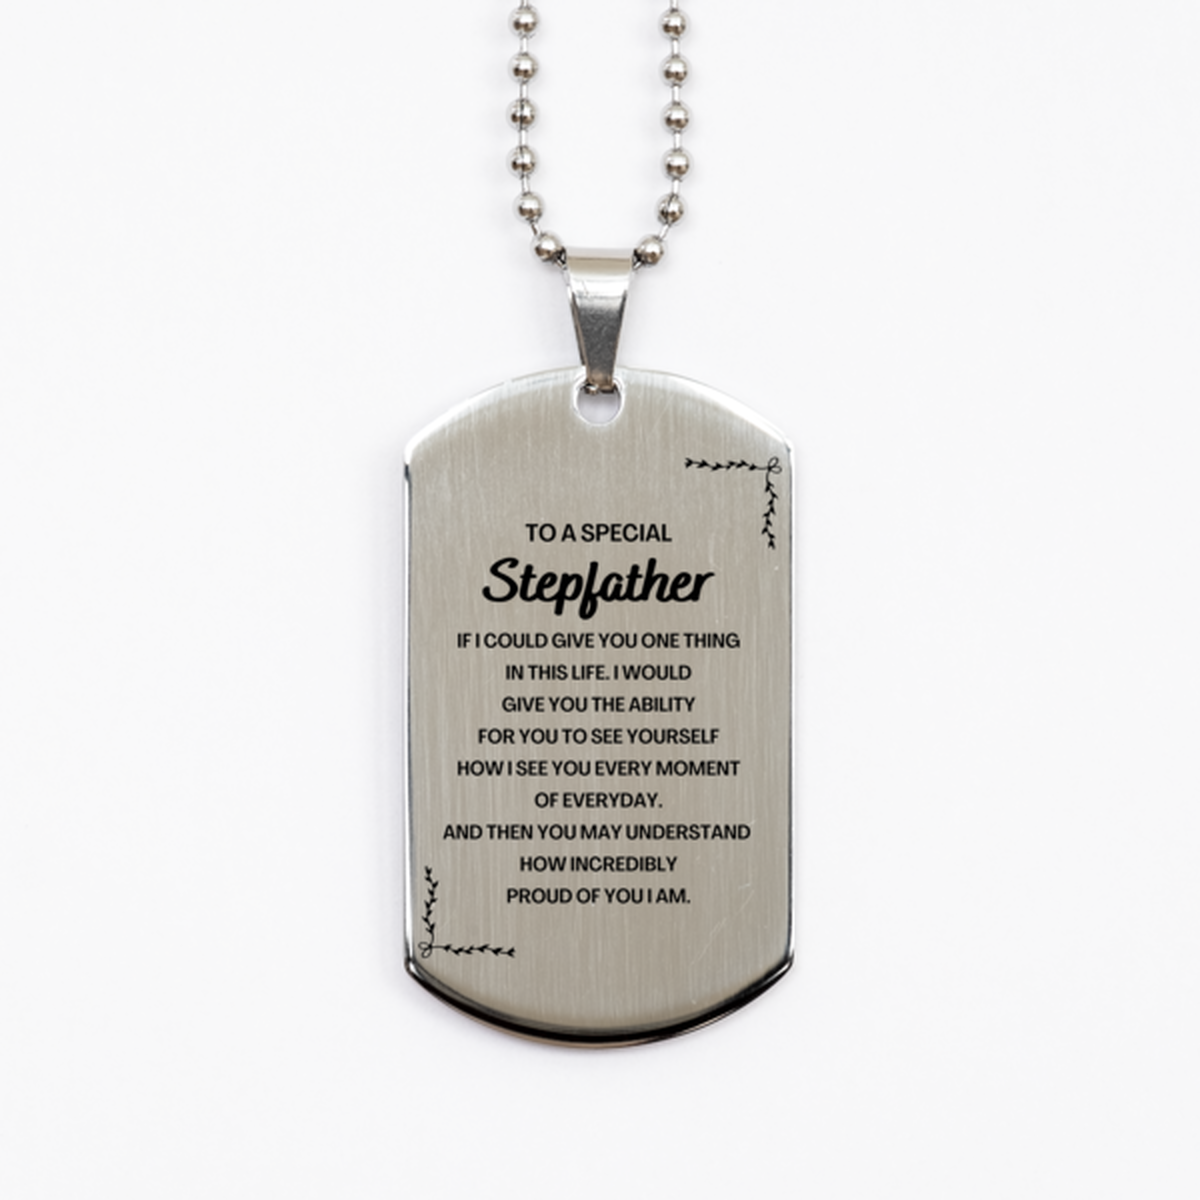 To My Stepfather Silver Dog Tag, Gifts For Stepfather Engraved, Inspirational Gifts for Christmas Birthday, Epic Gifts for Stepfather To A Special Stepfather how incredibly proud of you I am